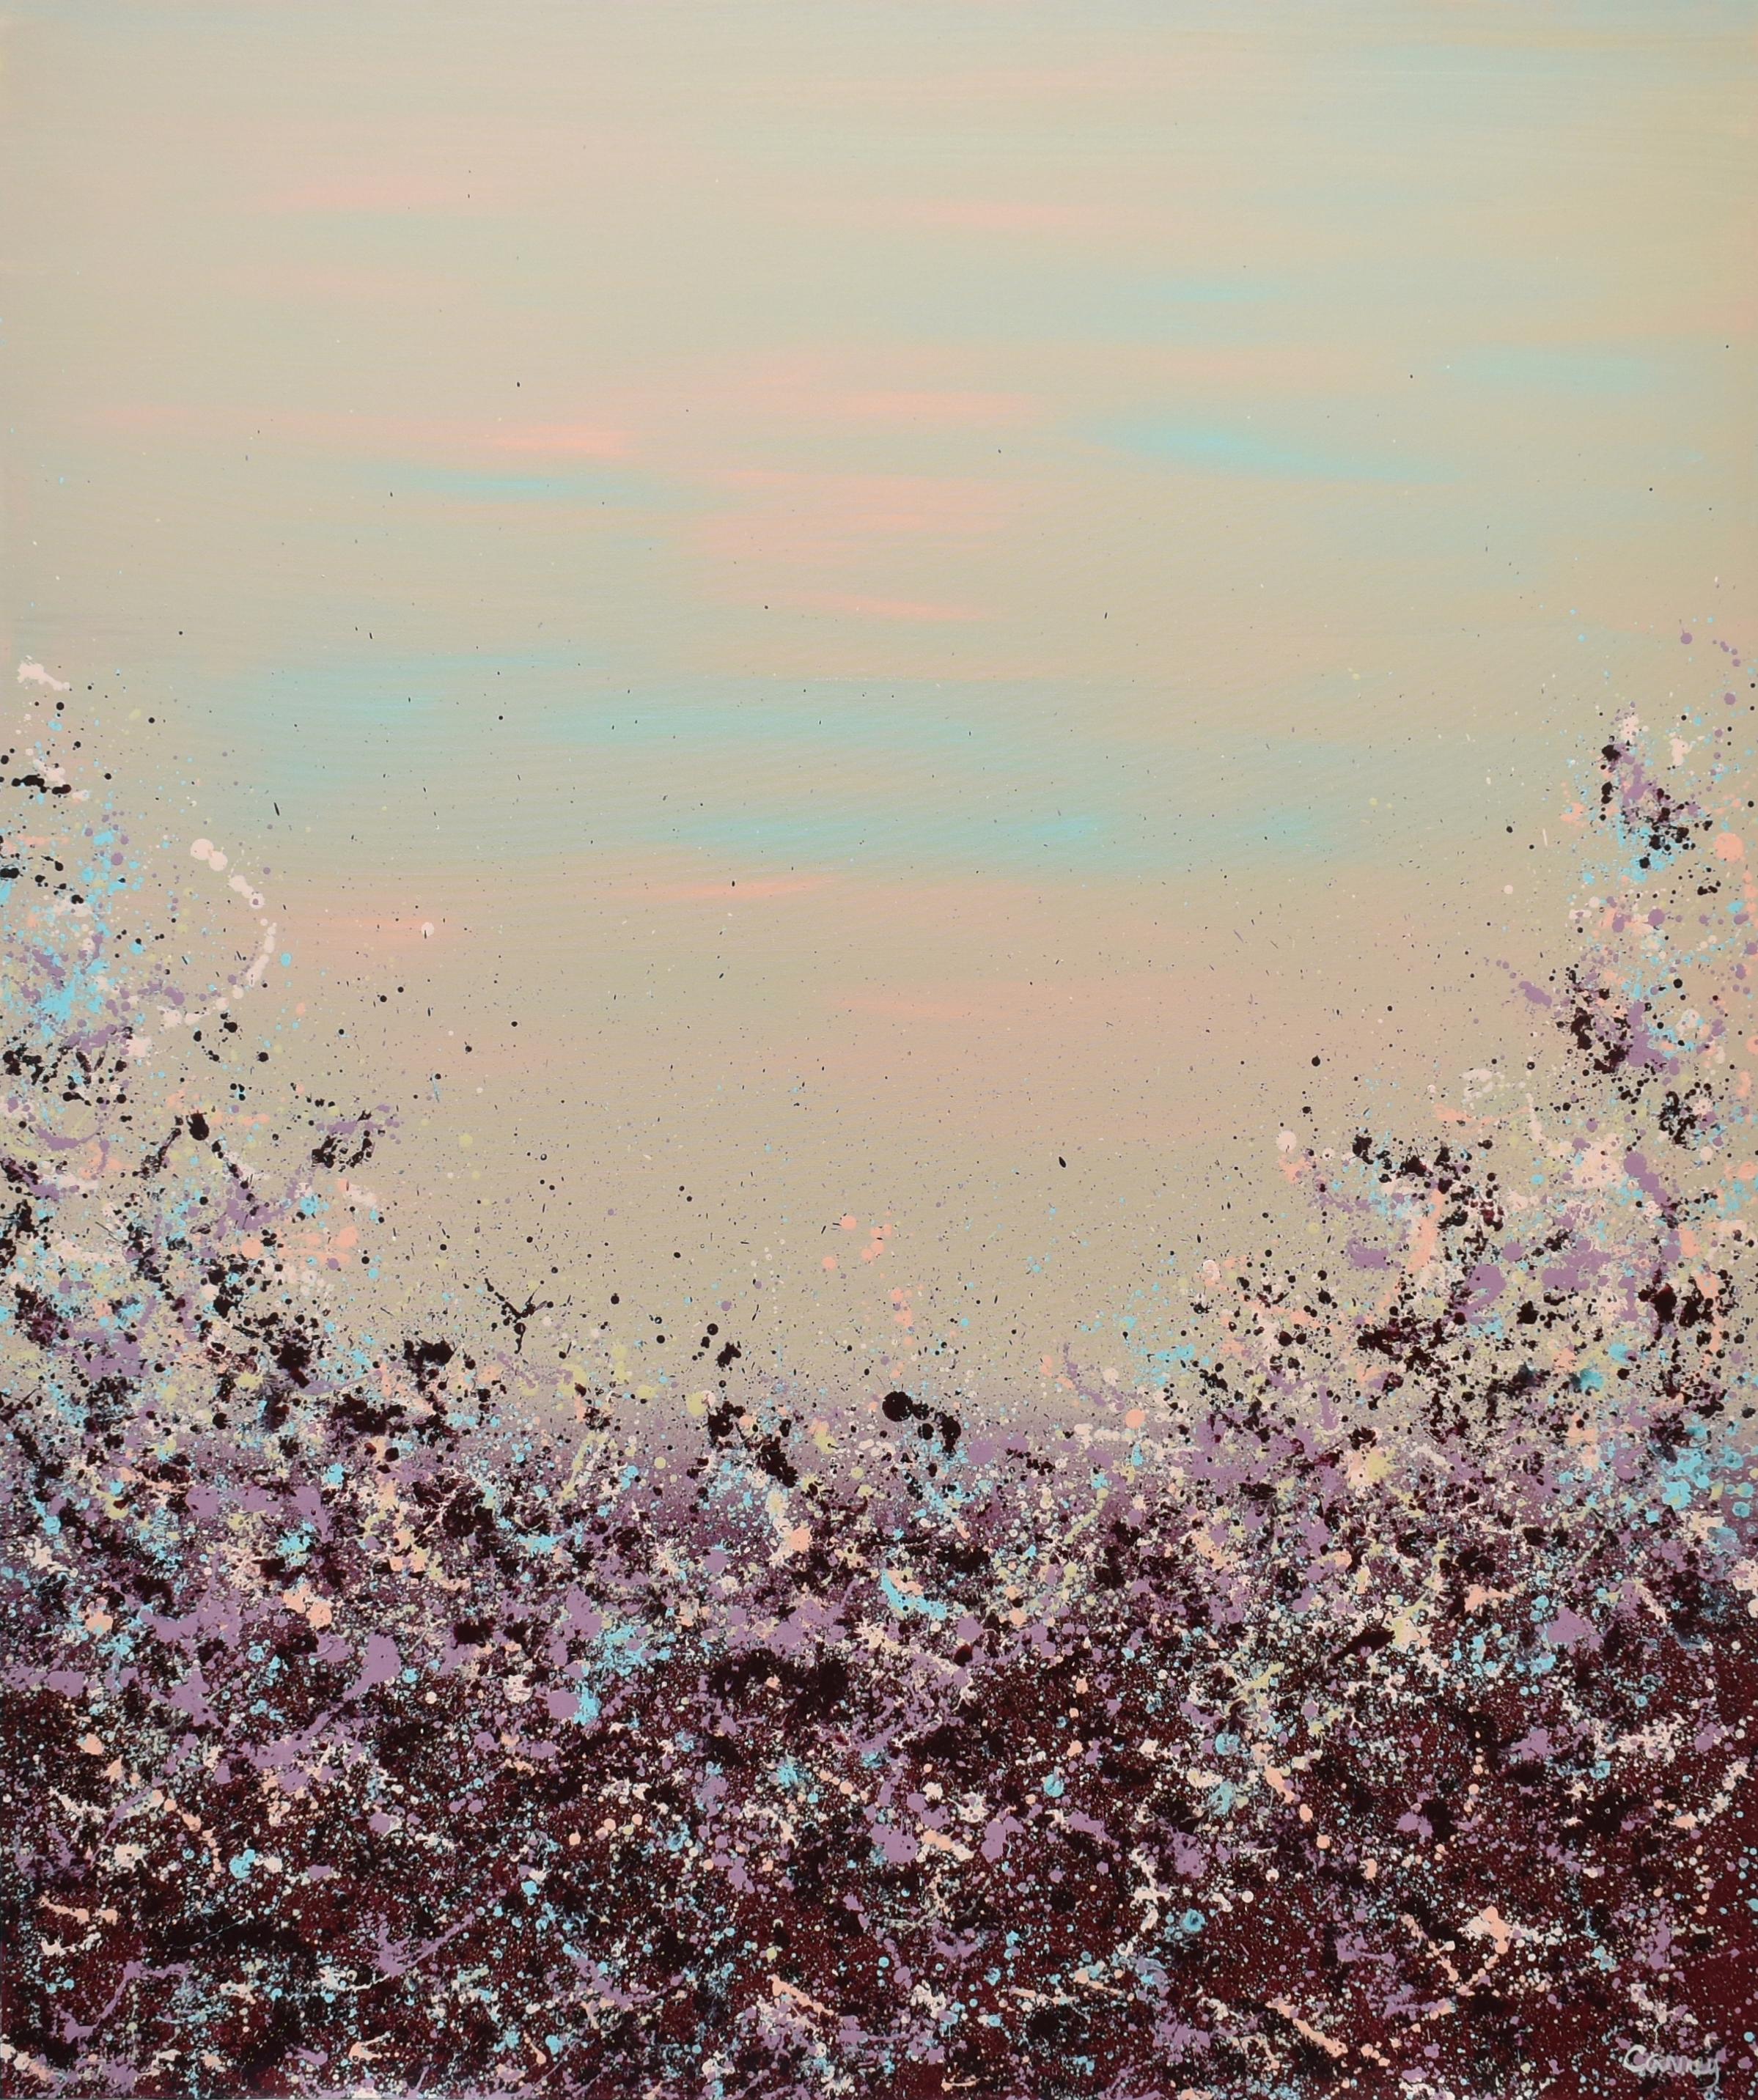 <p>Artist Comments<br />Artist Lisa Carney paints an arresting field of purple wildflowers. As part of her ongoing series of floral abstracts, Lisa uses drip and splatter techniques to express the blooms blanketing the landscape. She aptly balances